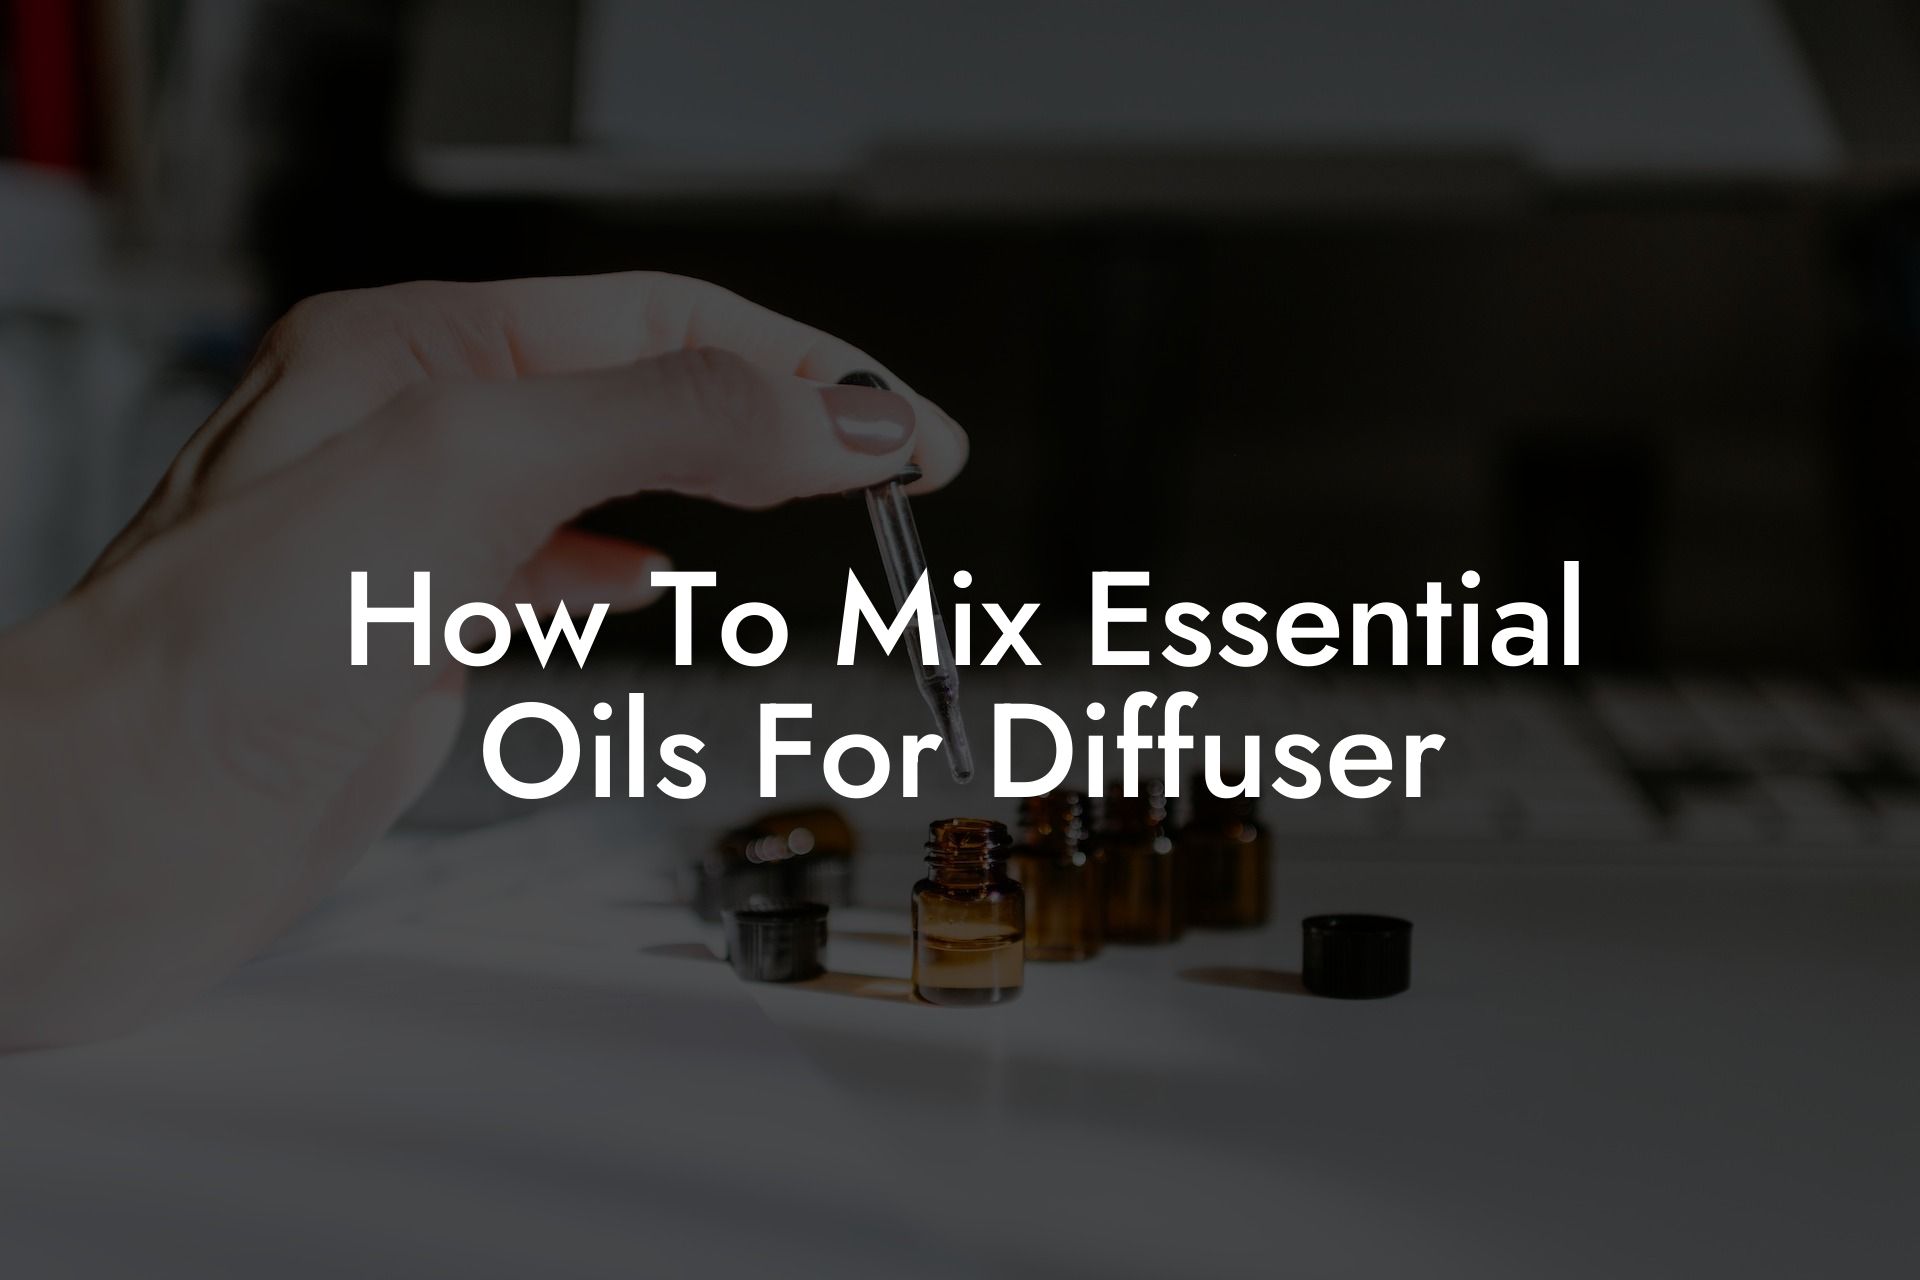 How To Mix Essential Oils For Diffuser